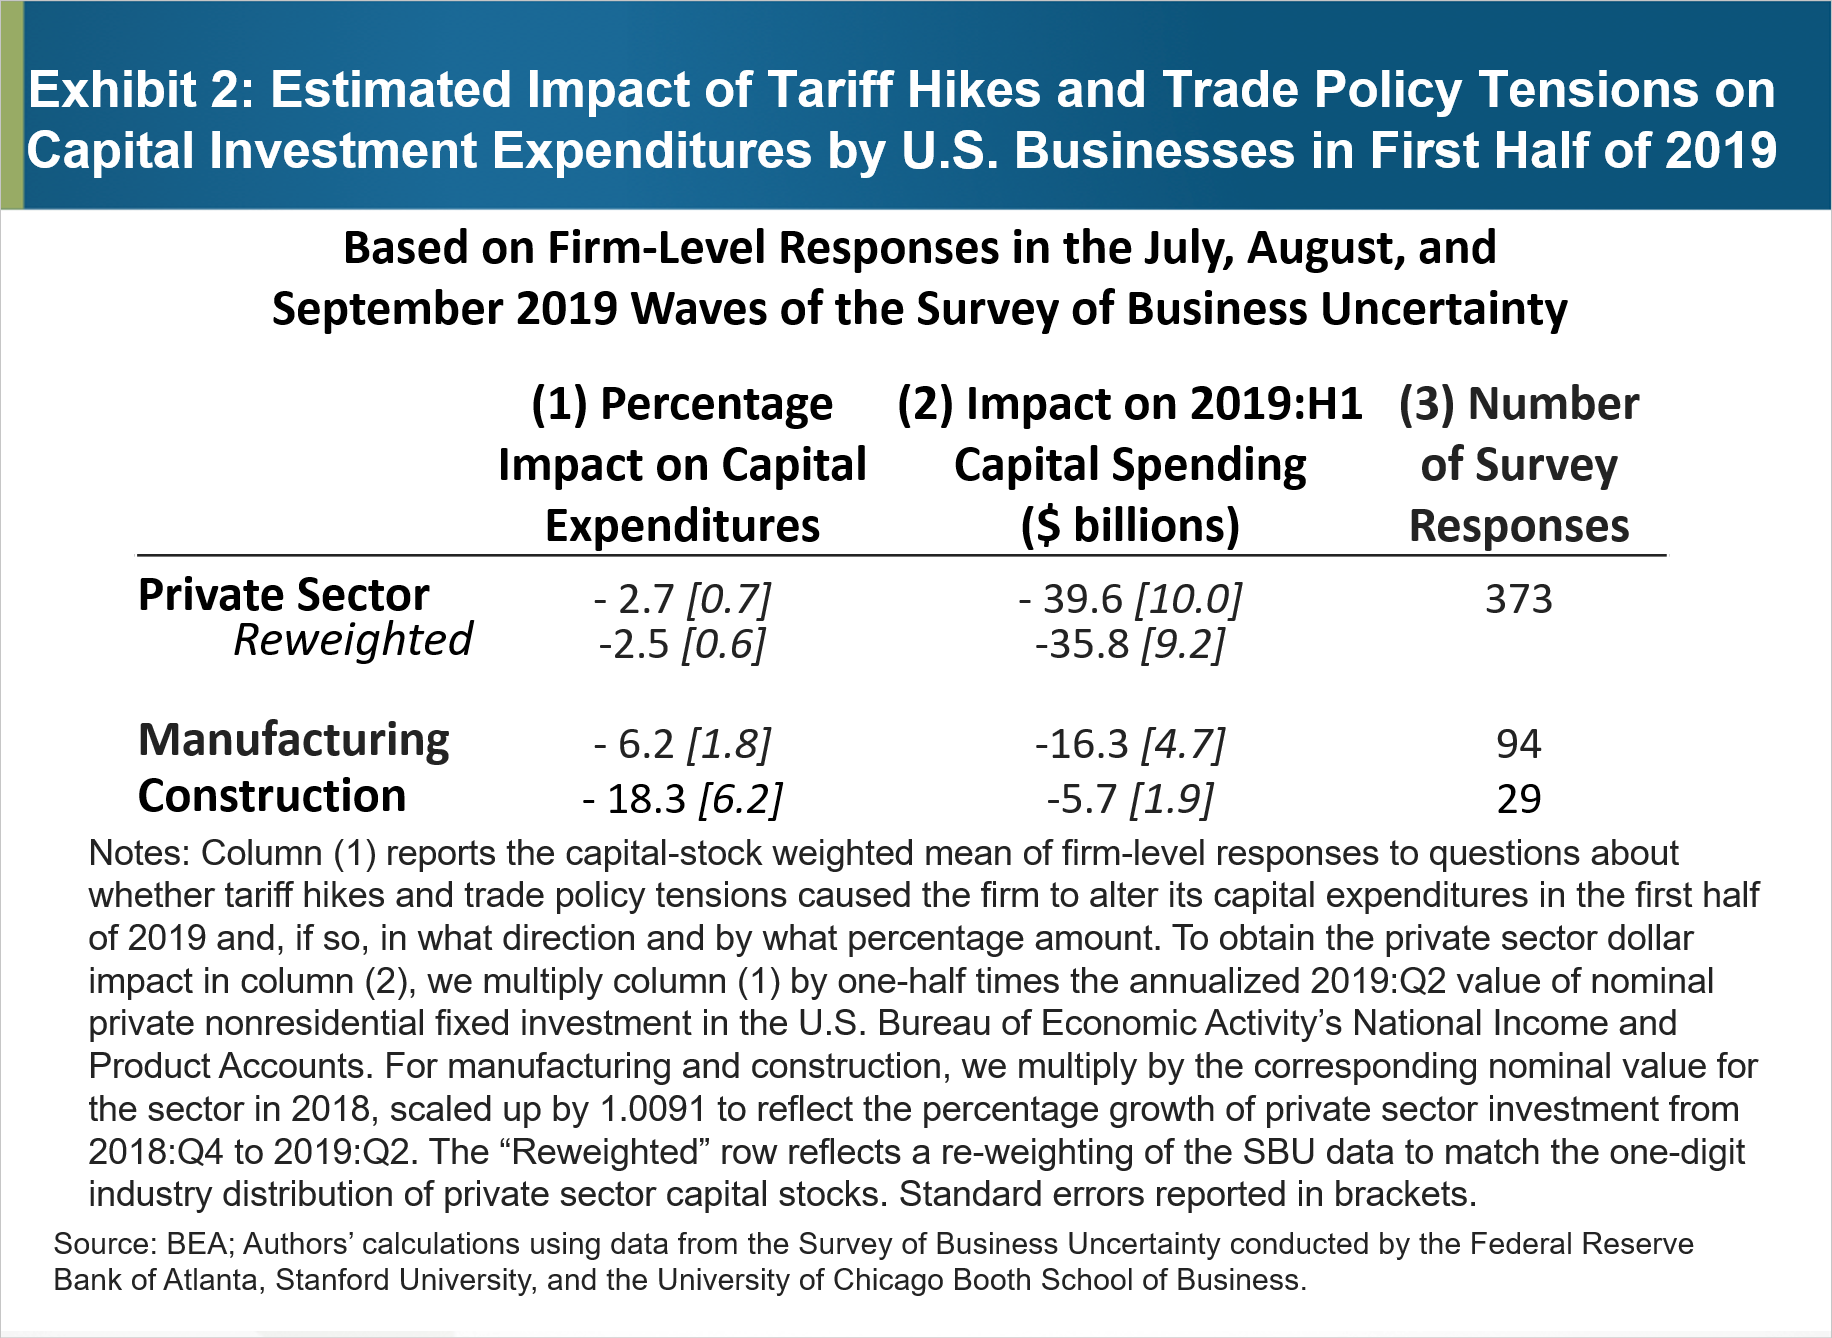 Exhibit 2: Estimated Impact of Tariff Hikes and Trade Policy Tensions on Capital Investment Expenditures by U.S. Businesses in First Half of 2019